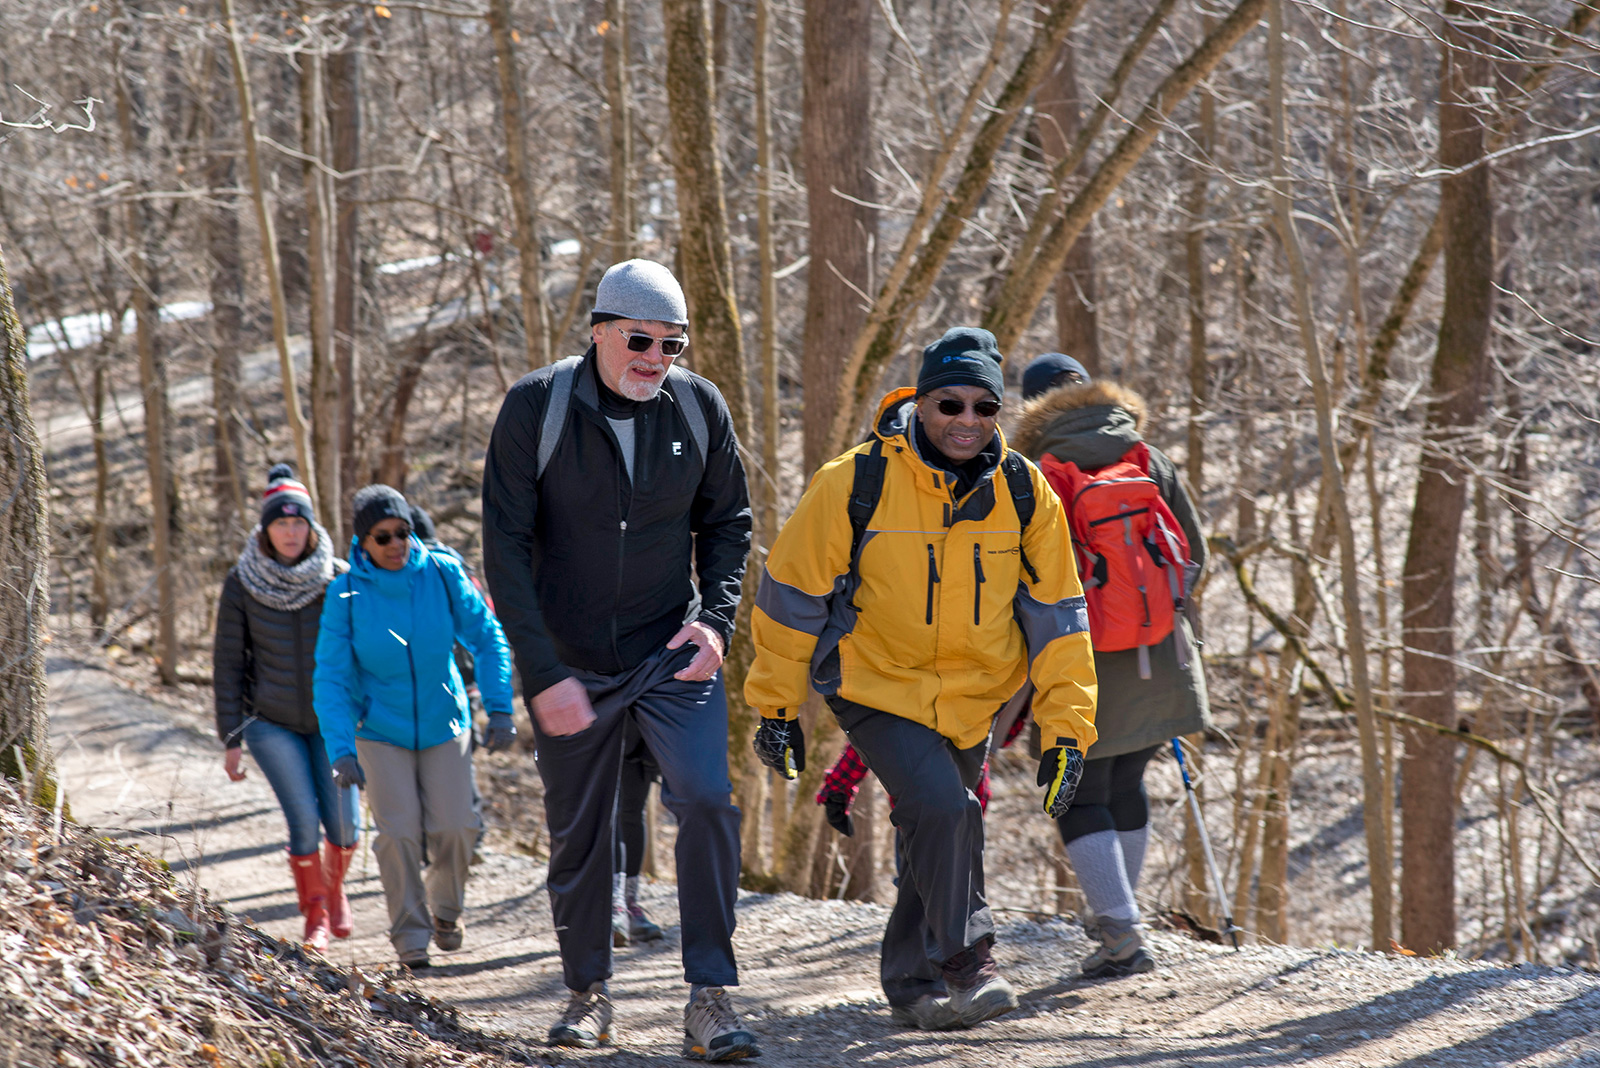 People hike during the winter hike at Battelle Darby Creek Metro Park.